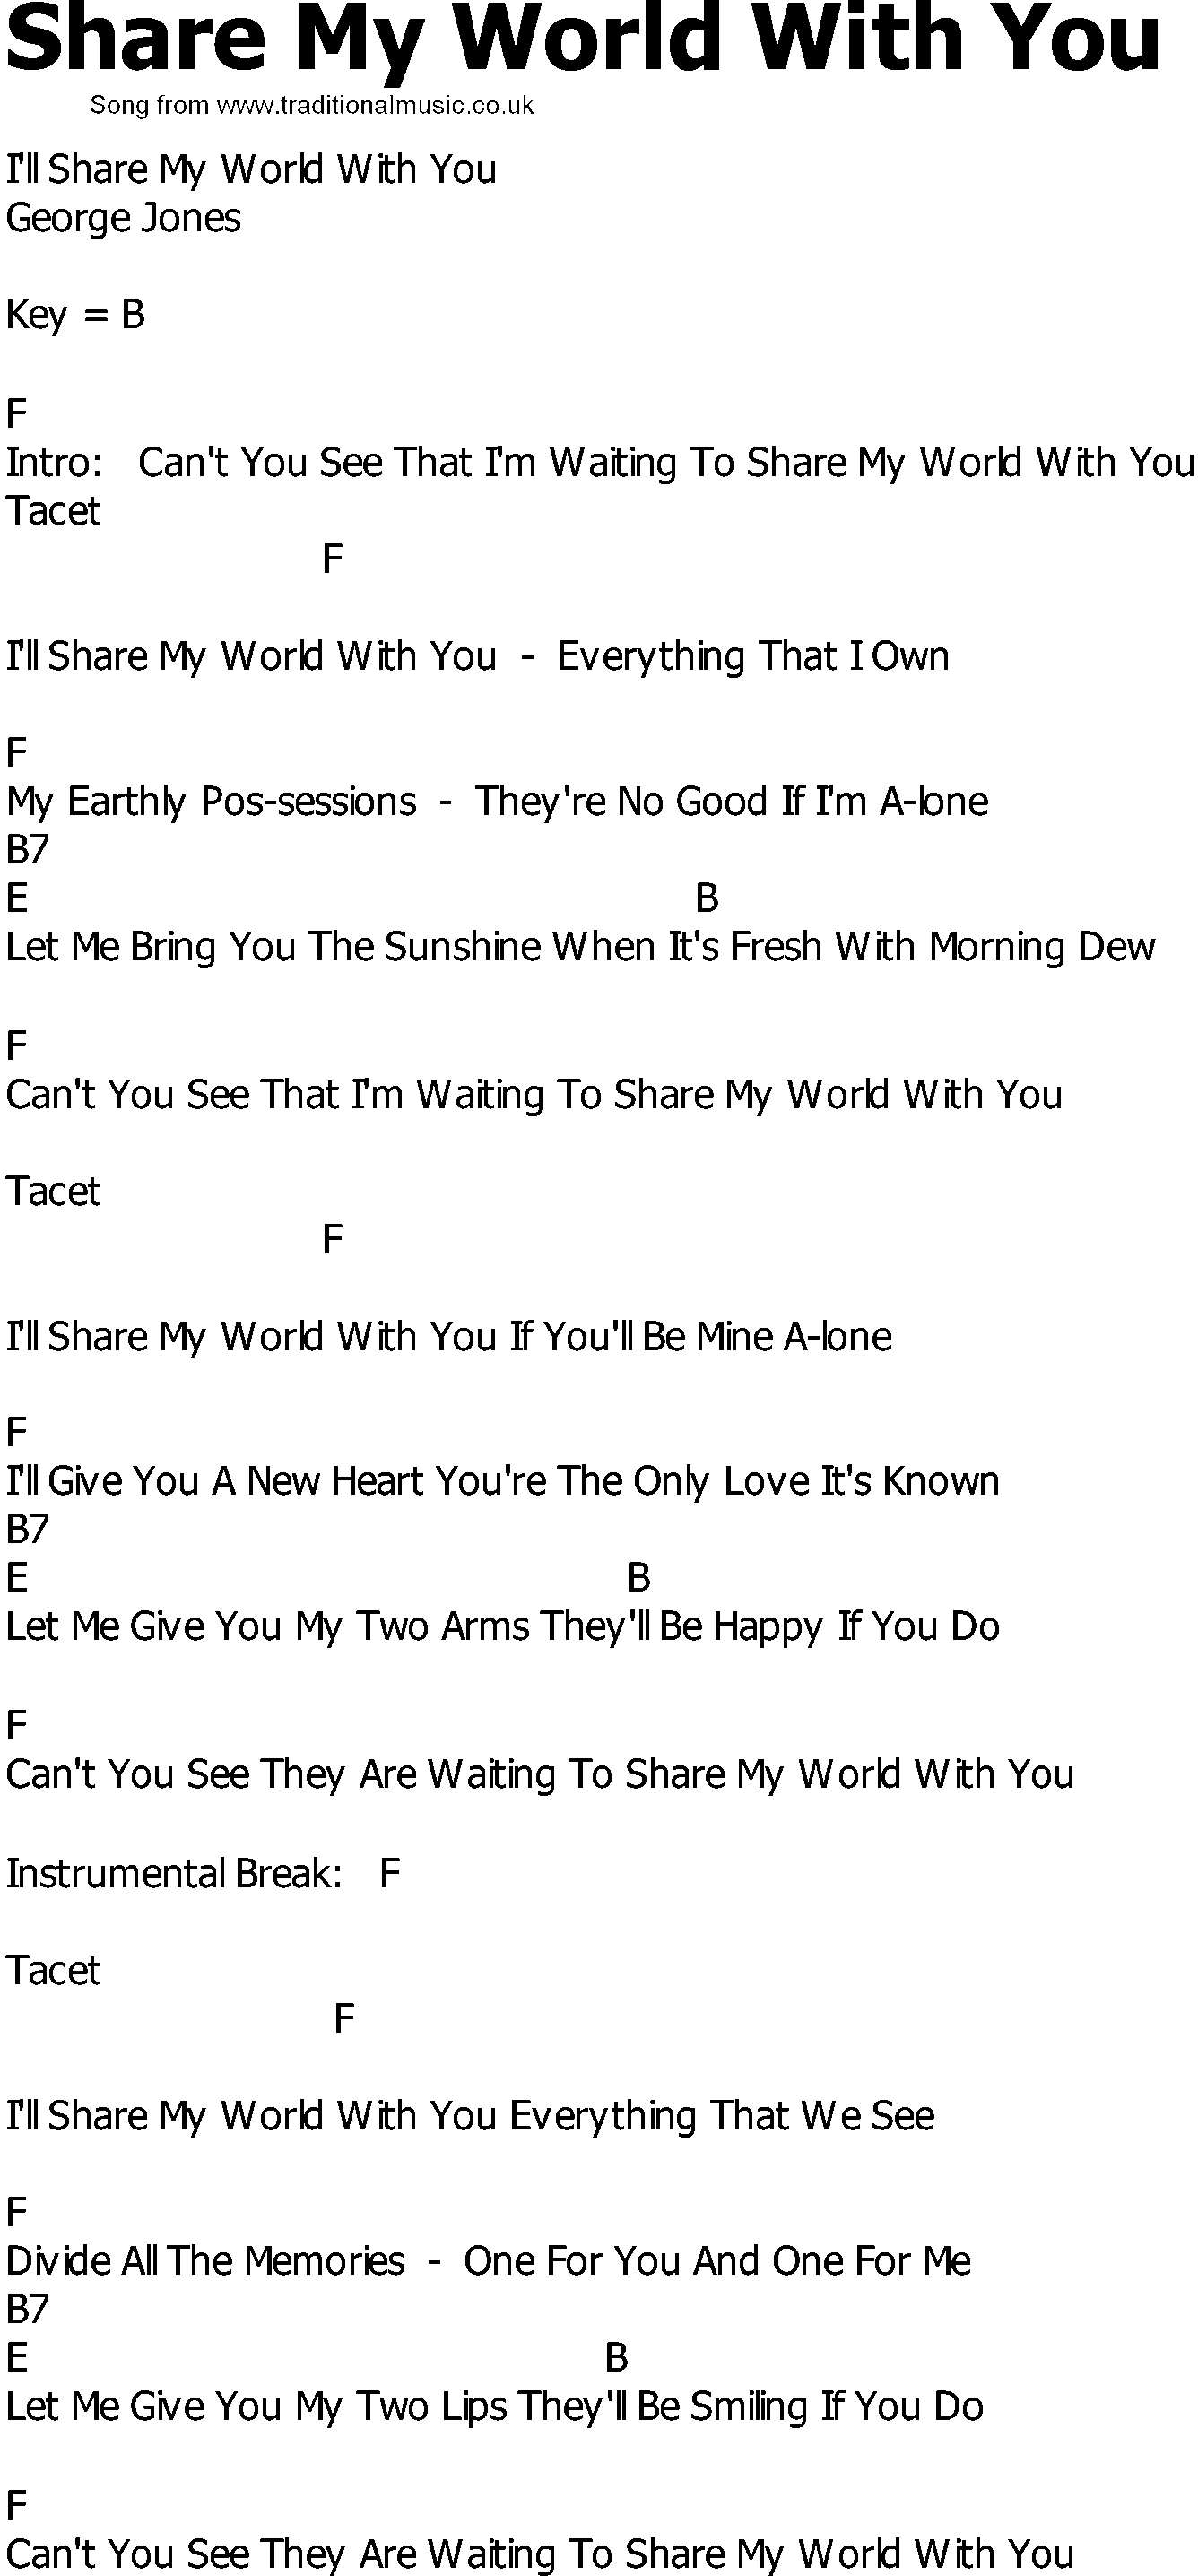 Old Country song lyrics with chords - Share My World With You